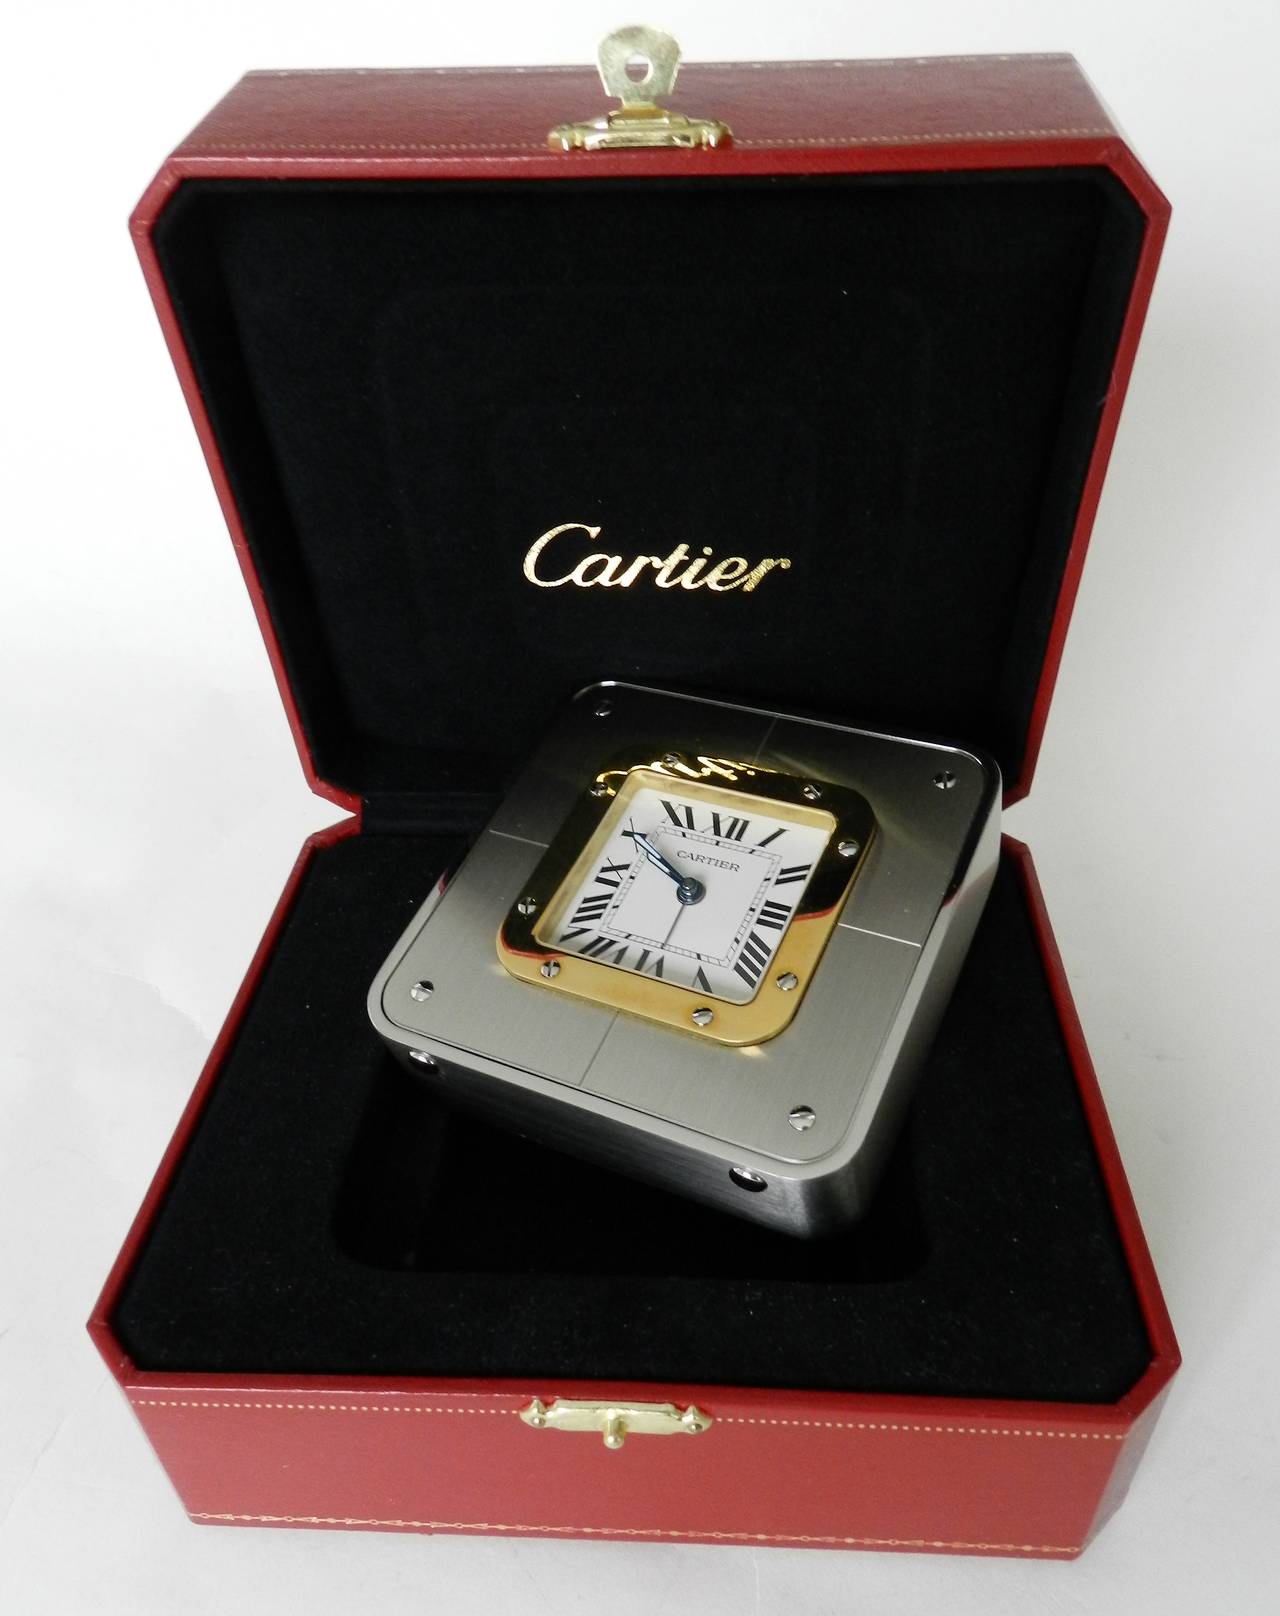 Cartier Santos desk clock. Brushed silvertone and gold with white face, roman numerals, alarm function, original box. Measures 3.5